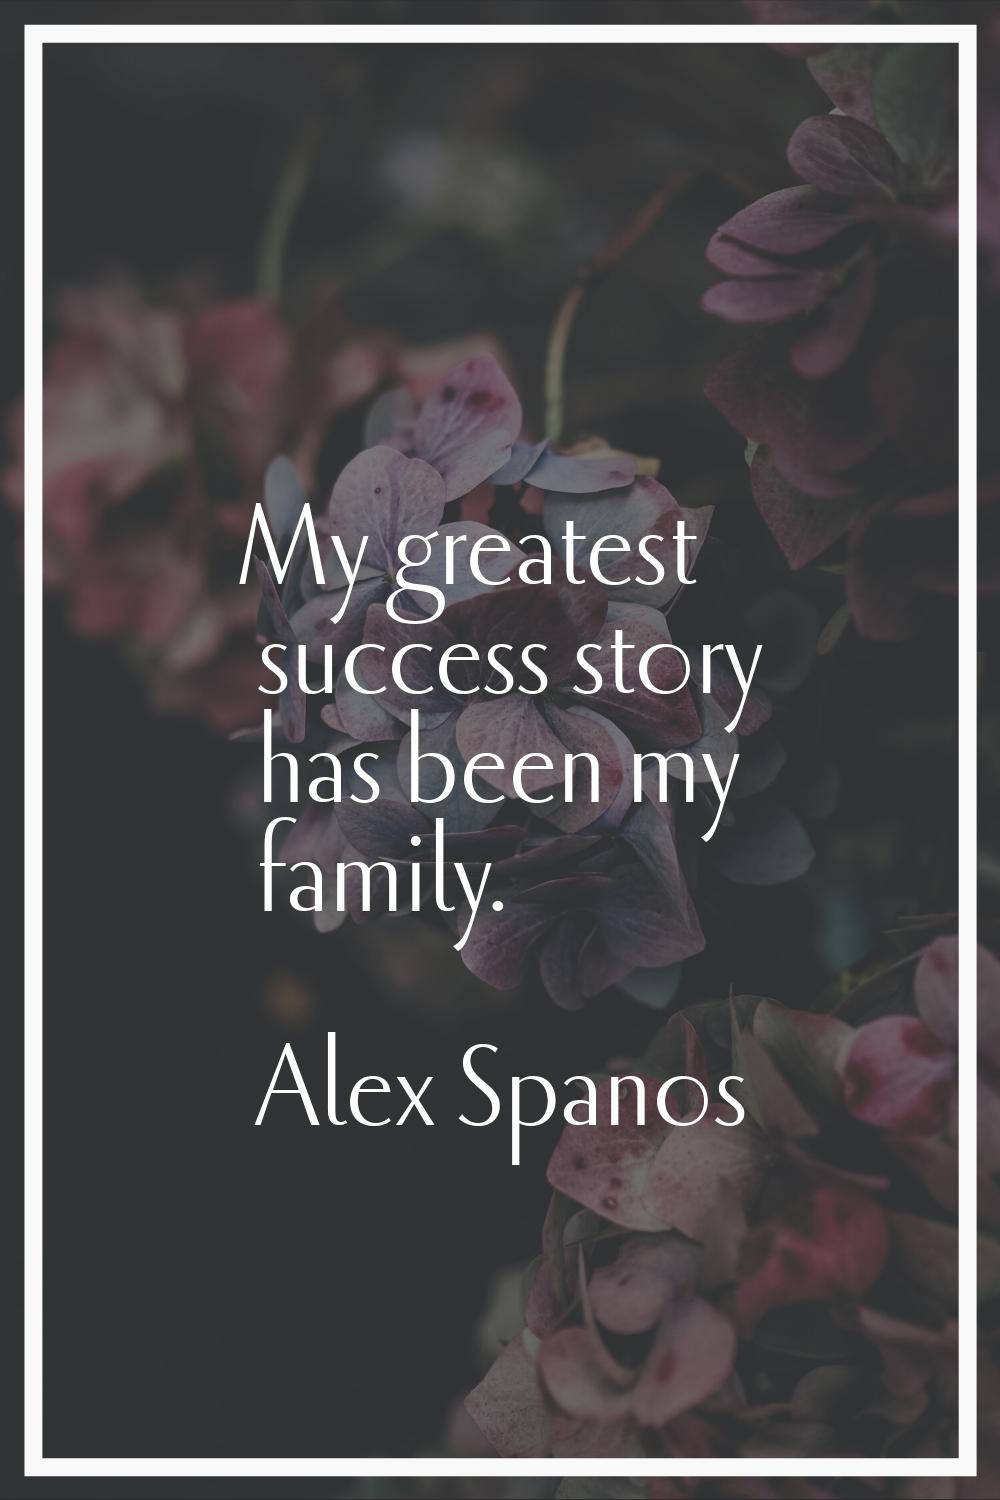 My greatest success story has been my family.